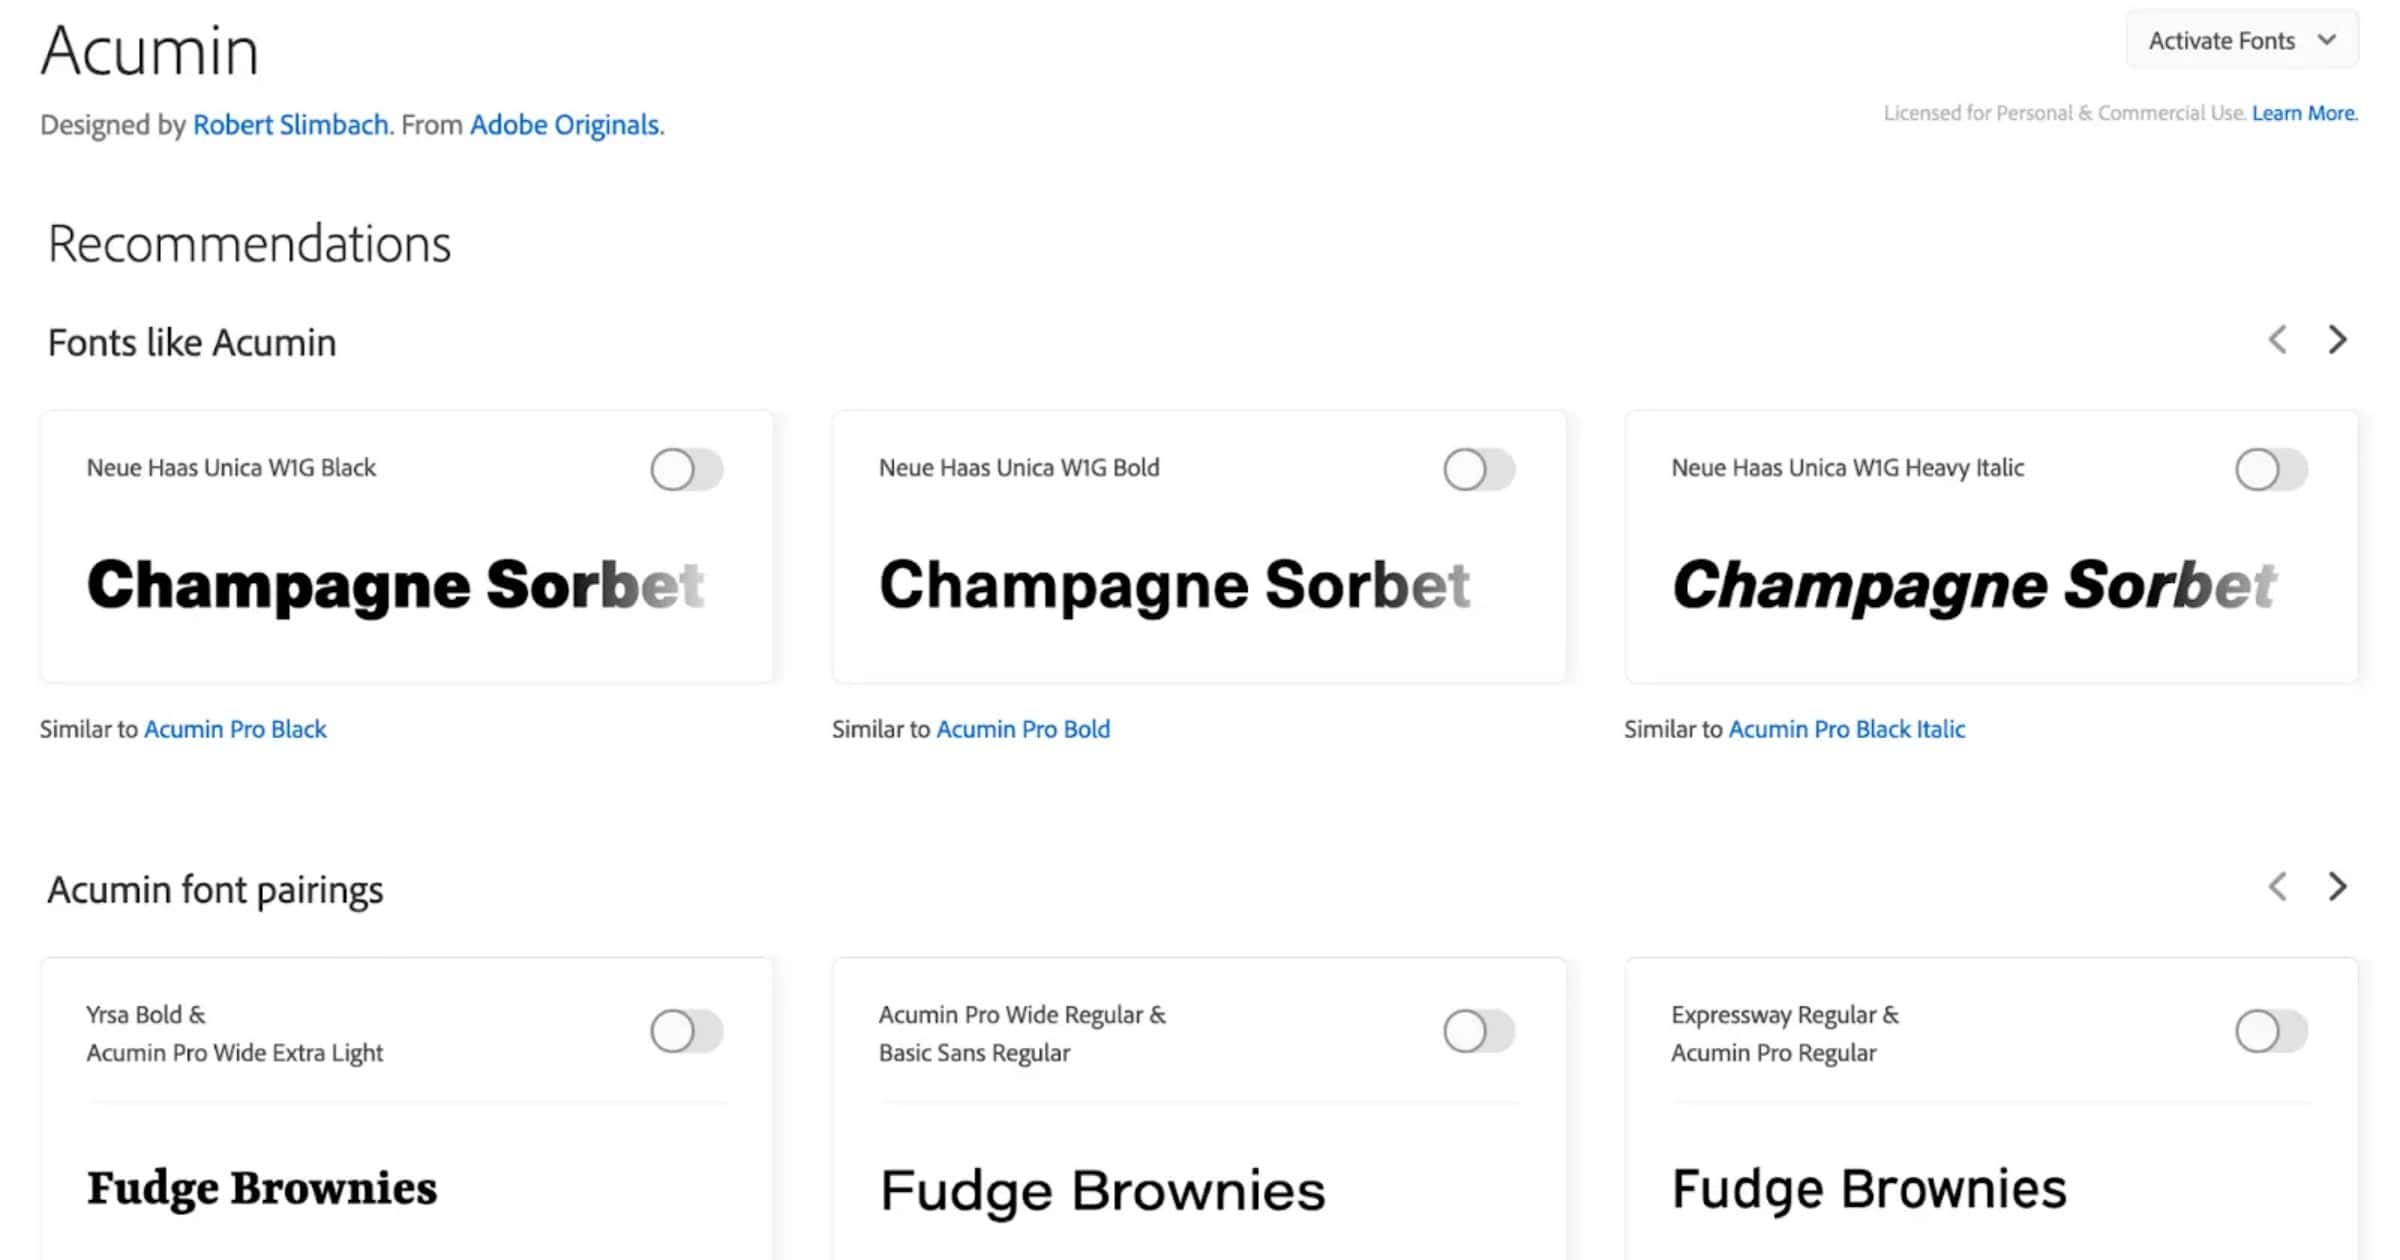 Adobe Launches New Fonts Recommendations Feature